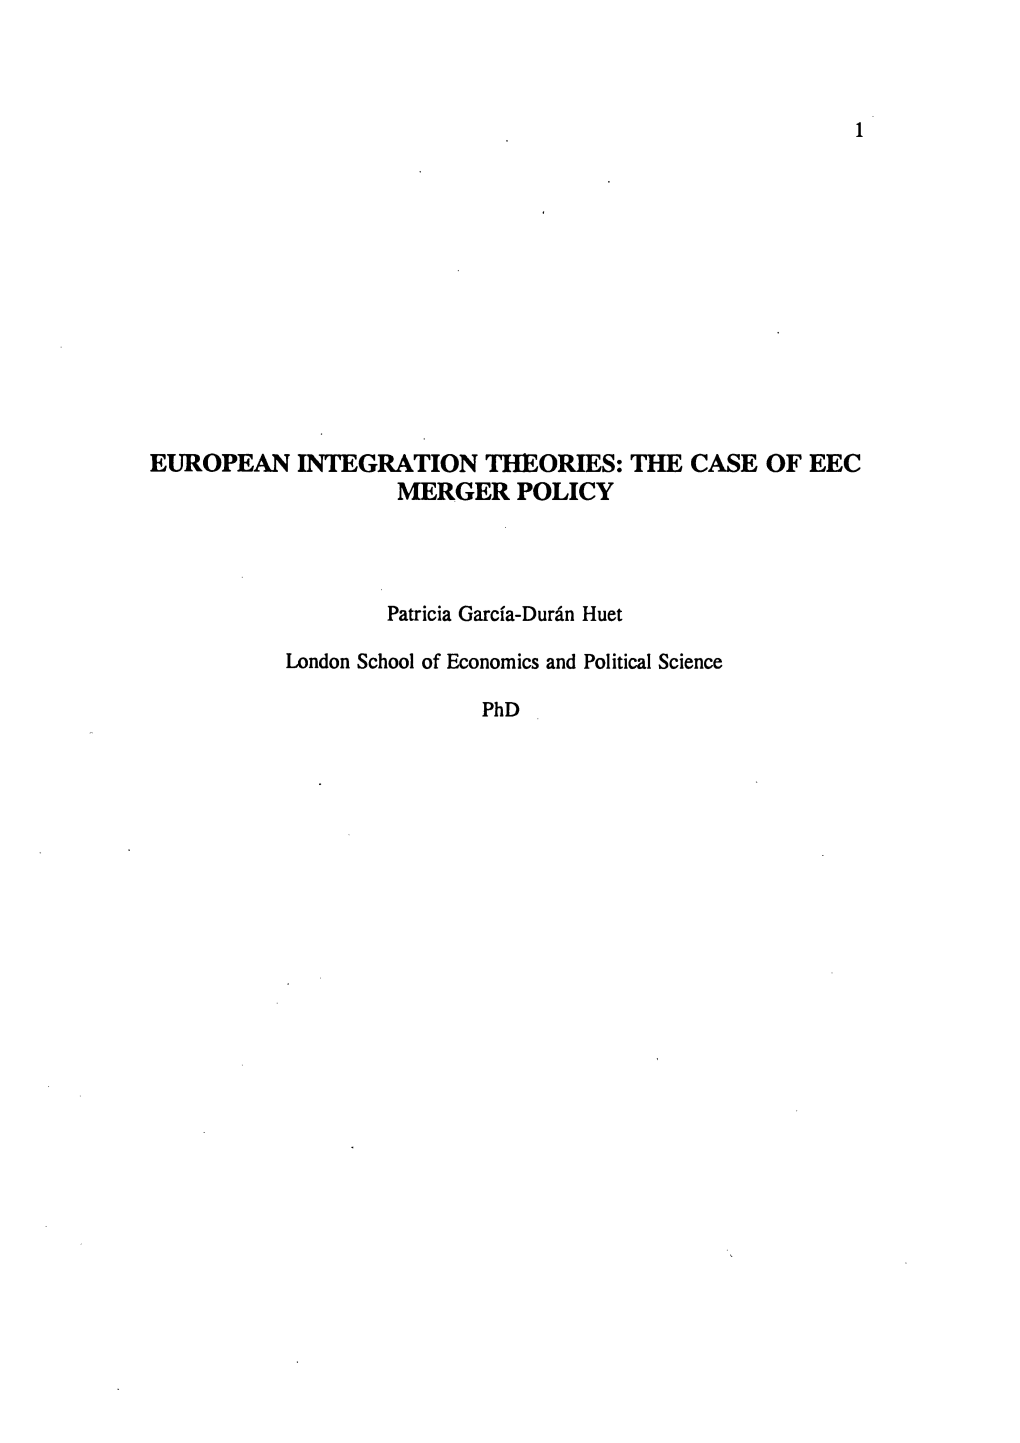 European Integration Theories: the Case of Eec Merger Policy